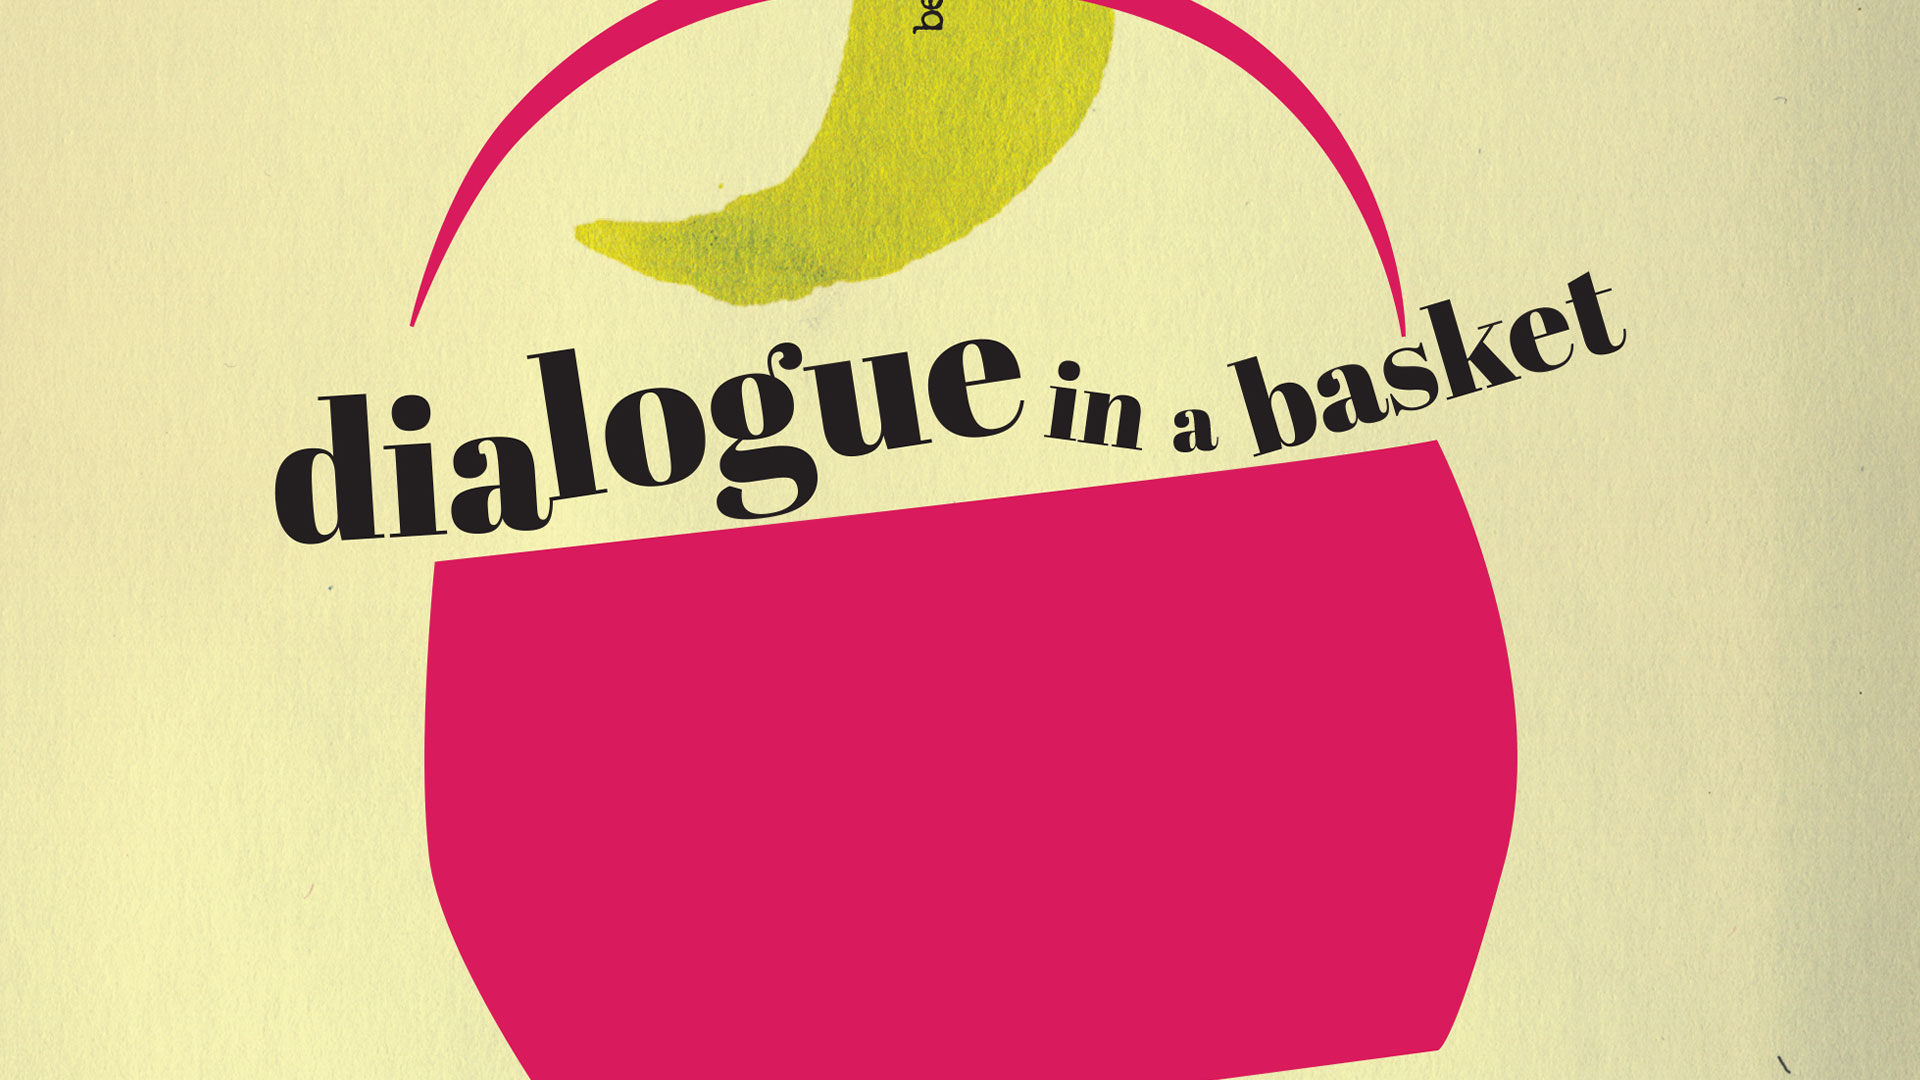 Dialogue in a Basket